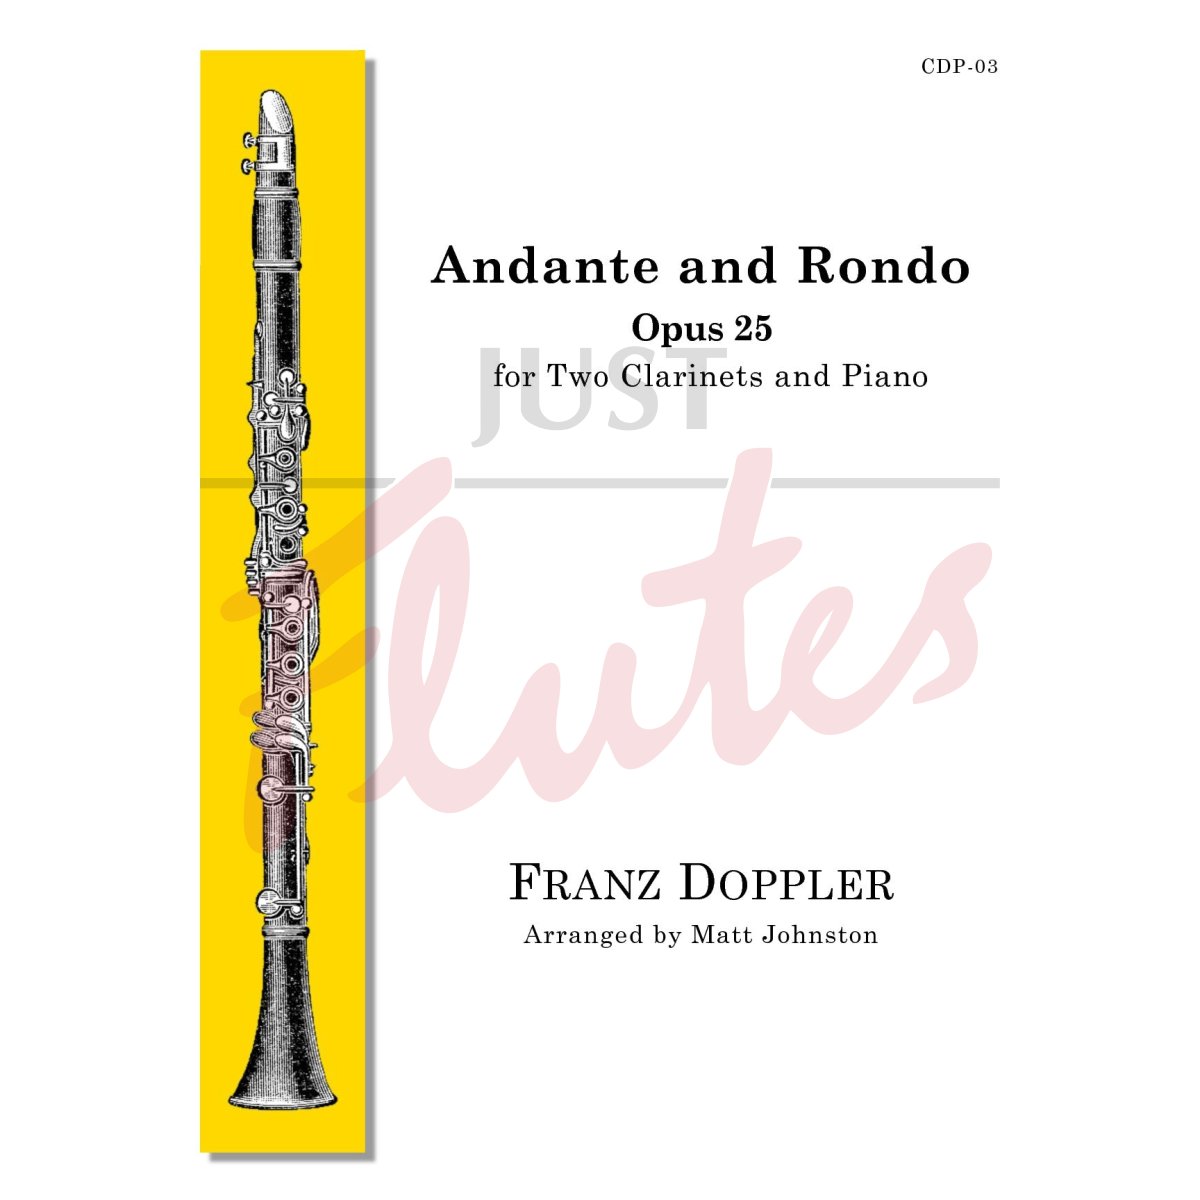 Andante and Rondo for Two Clarinets and Piano